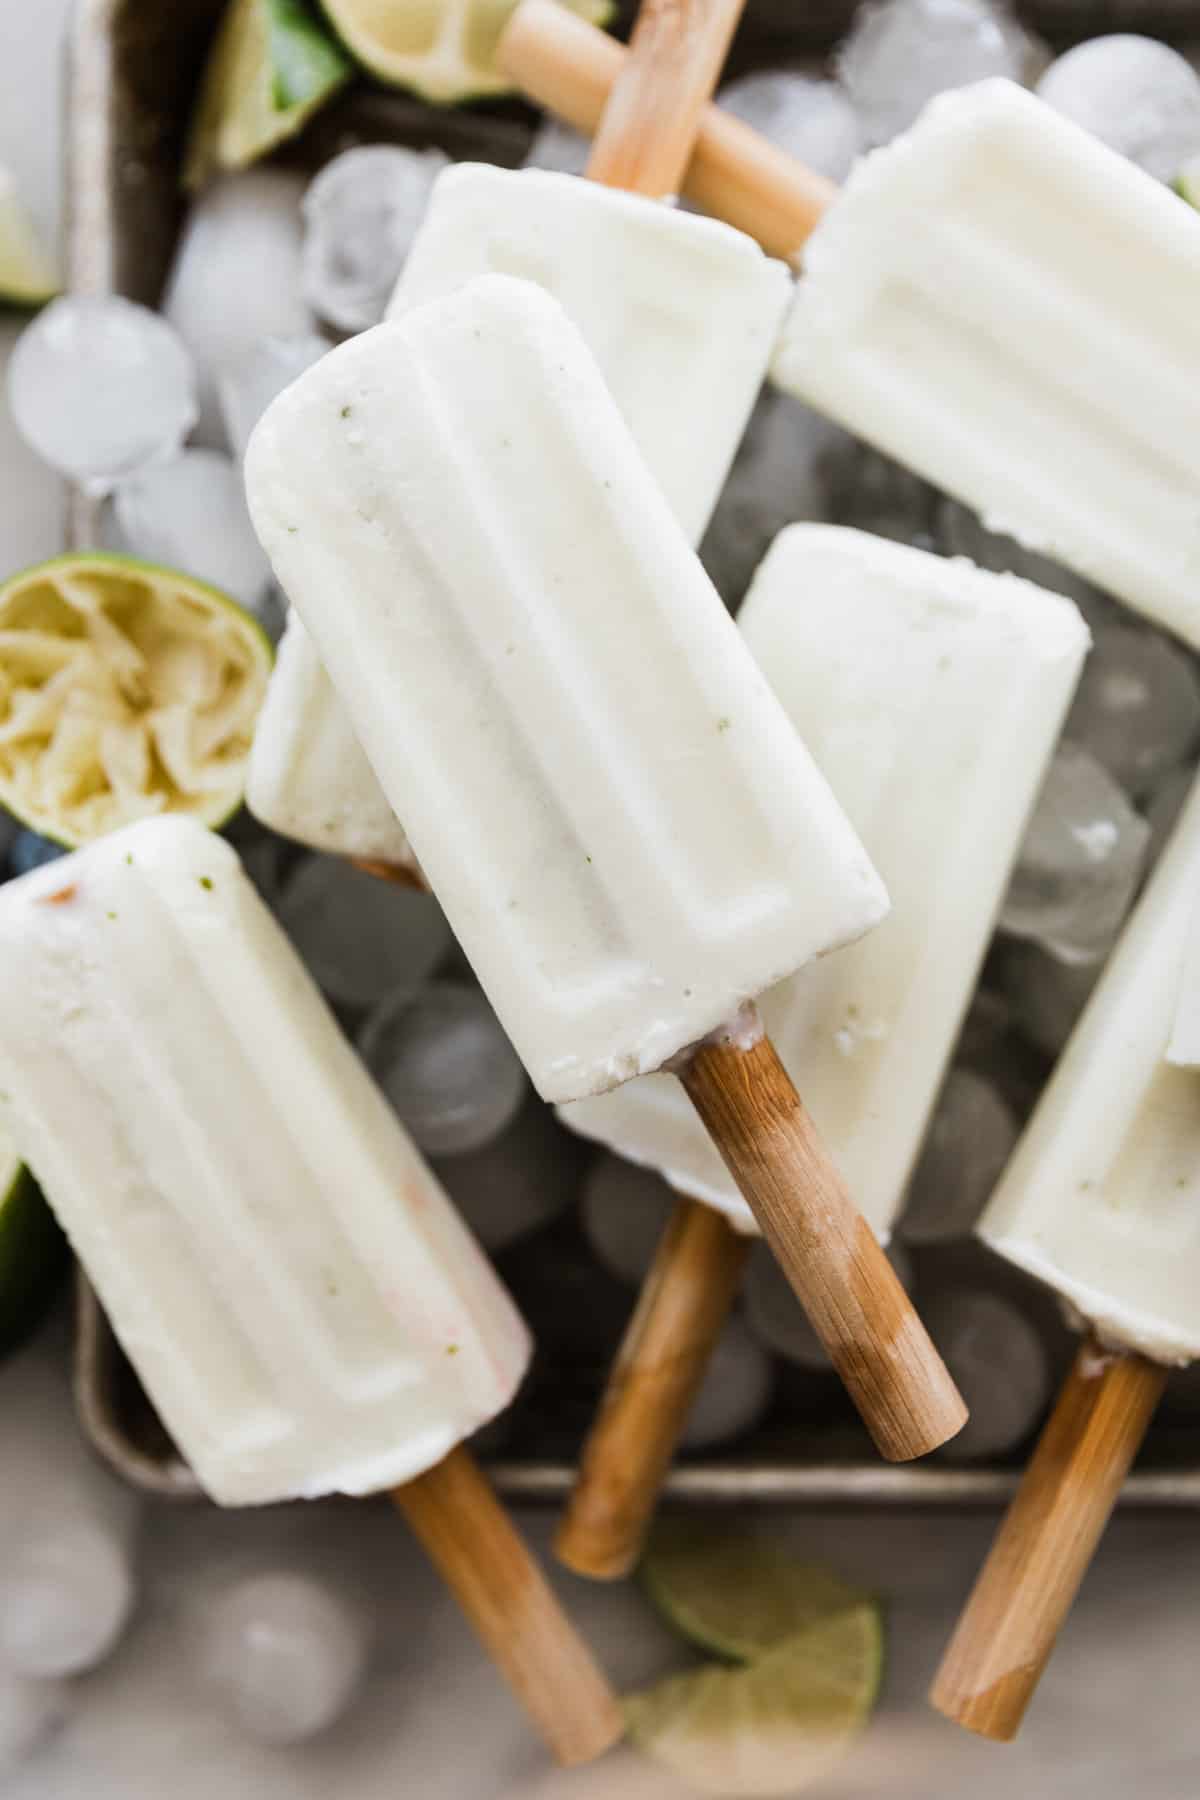 One creamy lime popsicle with round popsicle stick on other popsicles and ice. 